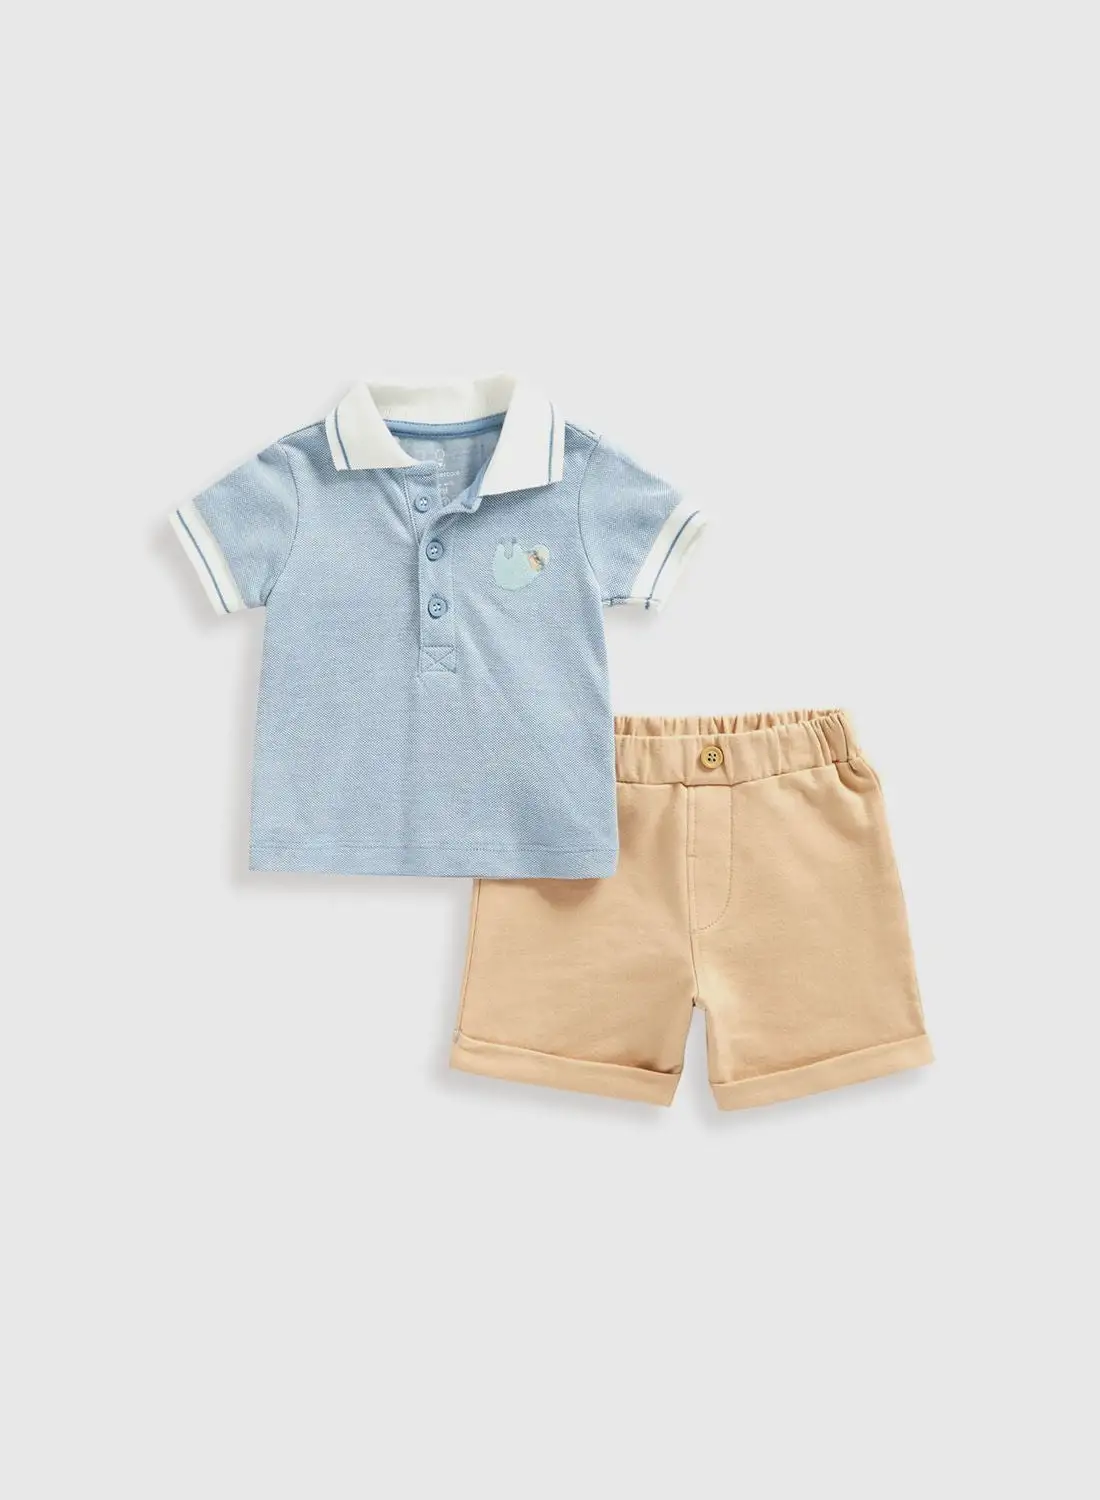 mothercare Kids Embroidered Polo & Shorts Set